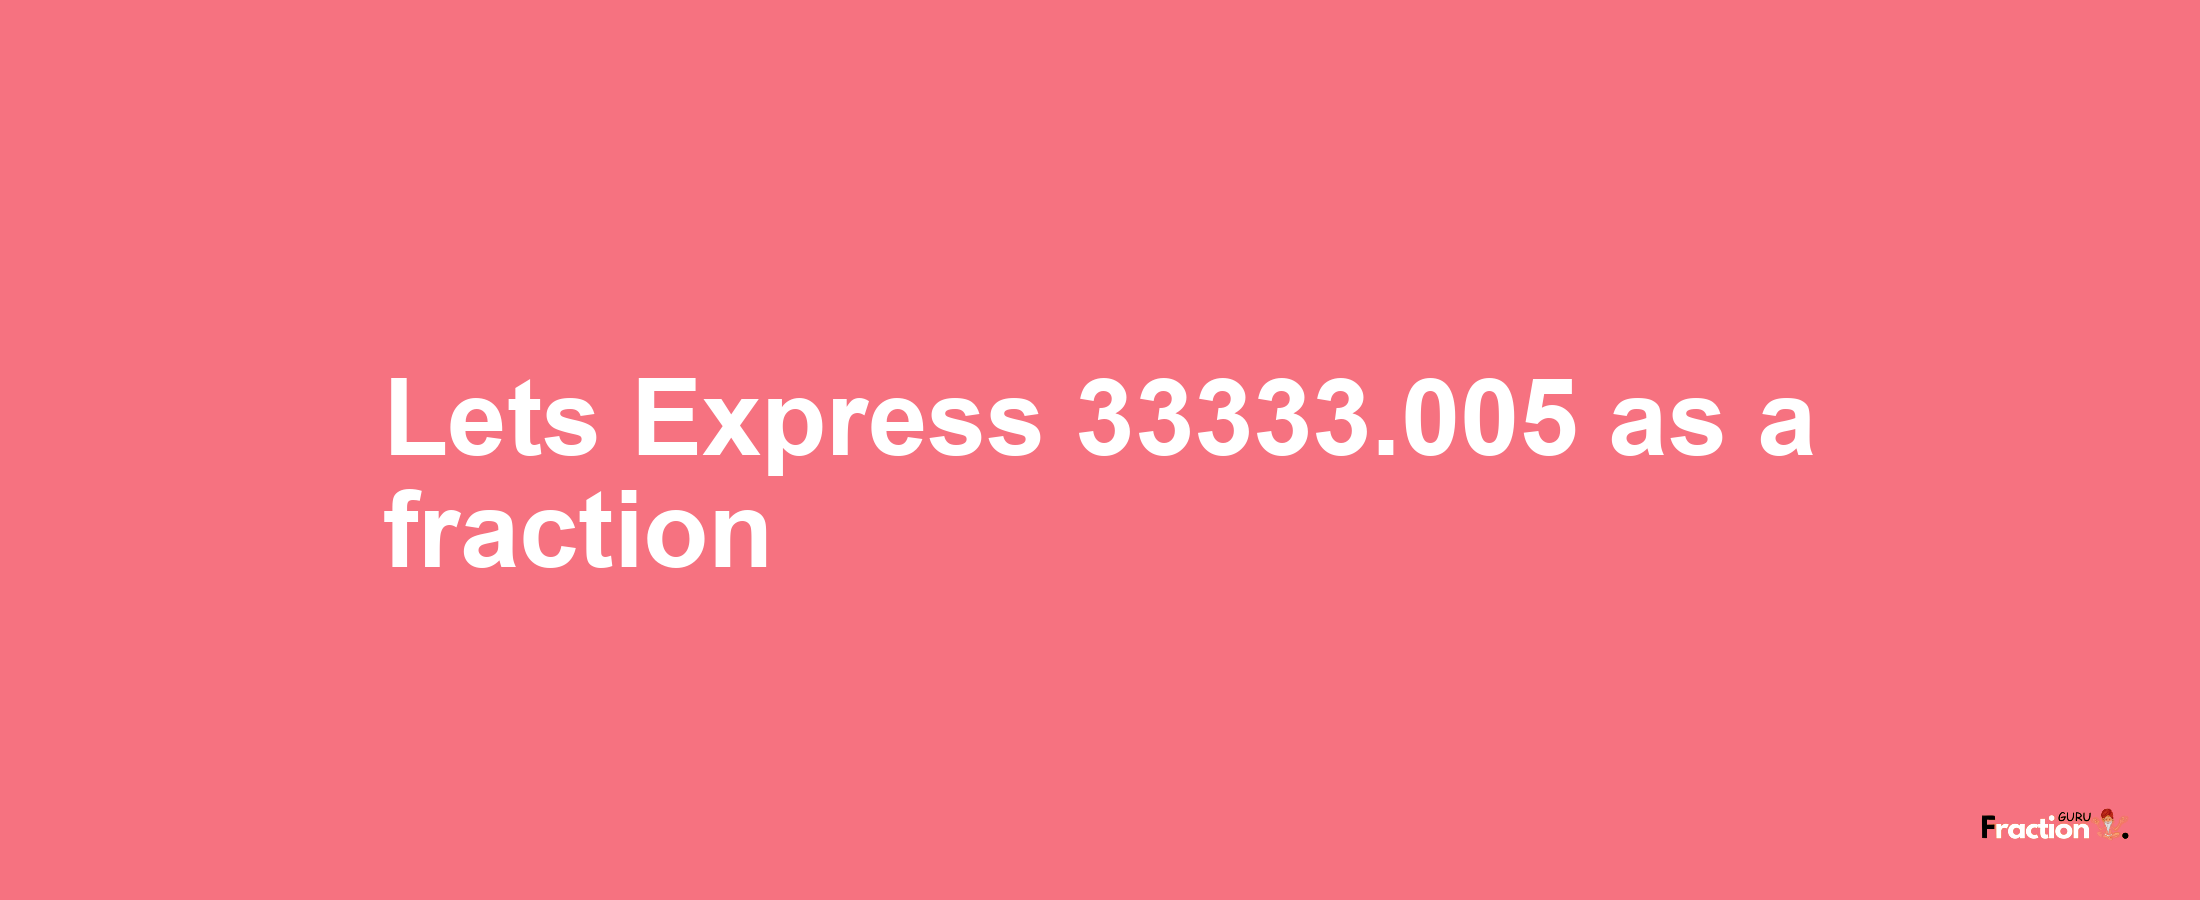 Lets Express 33333.005 as afraction